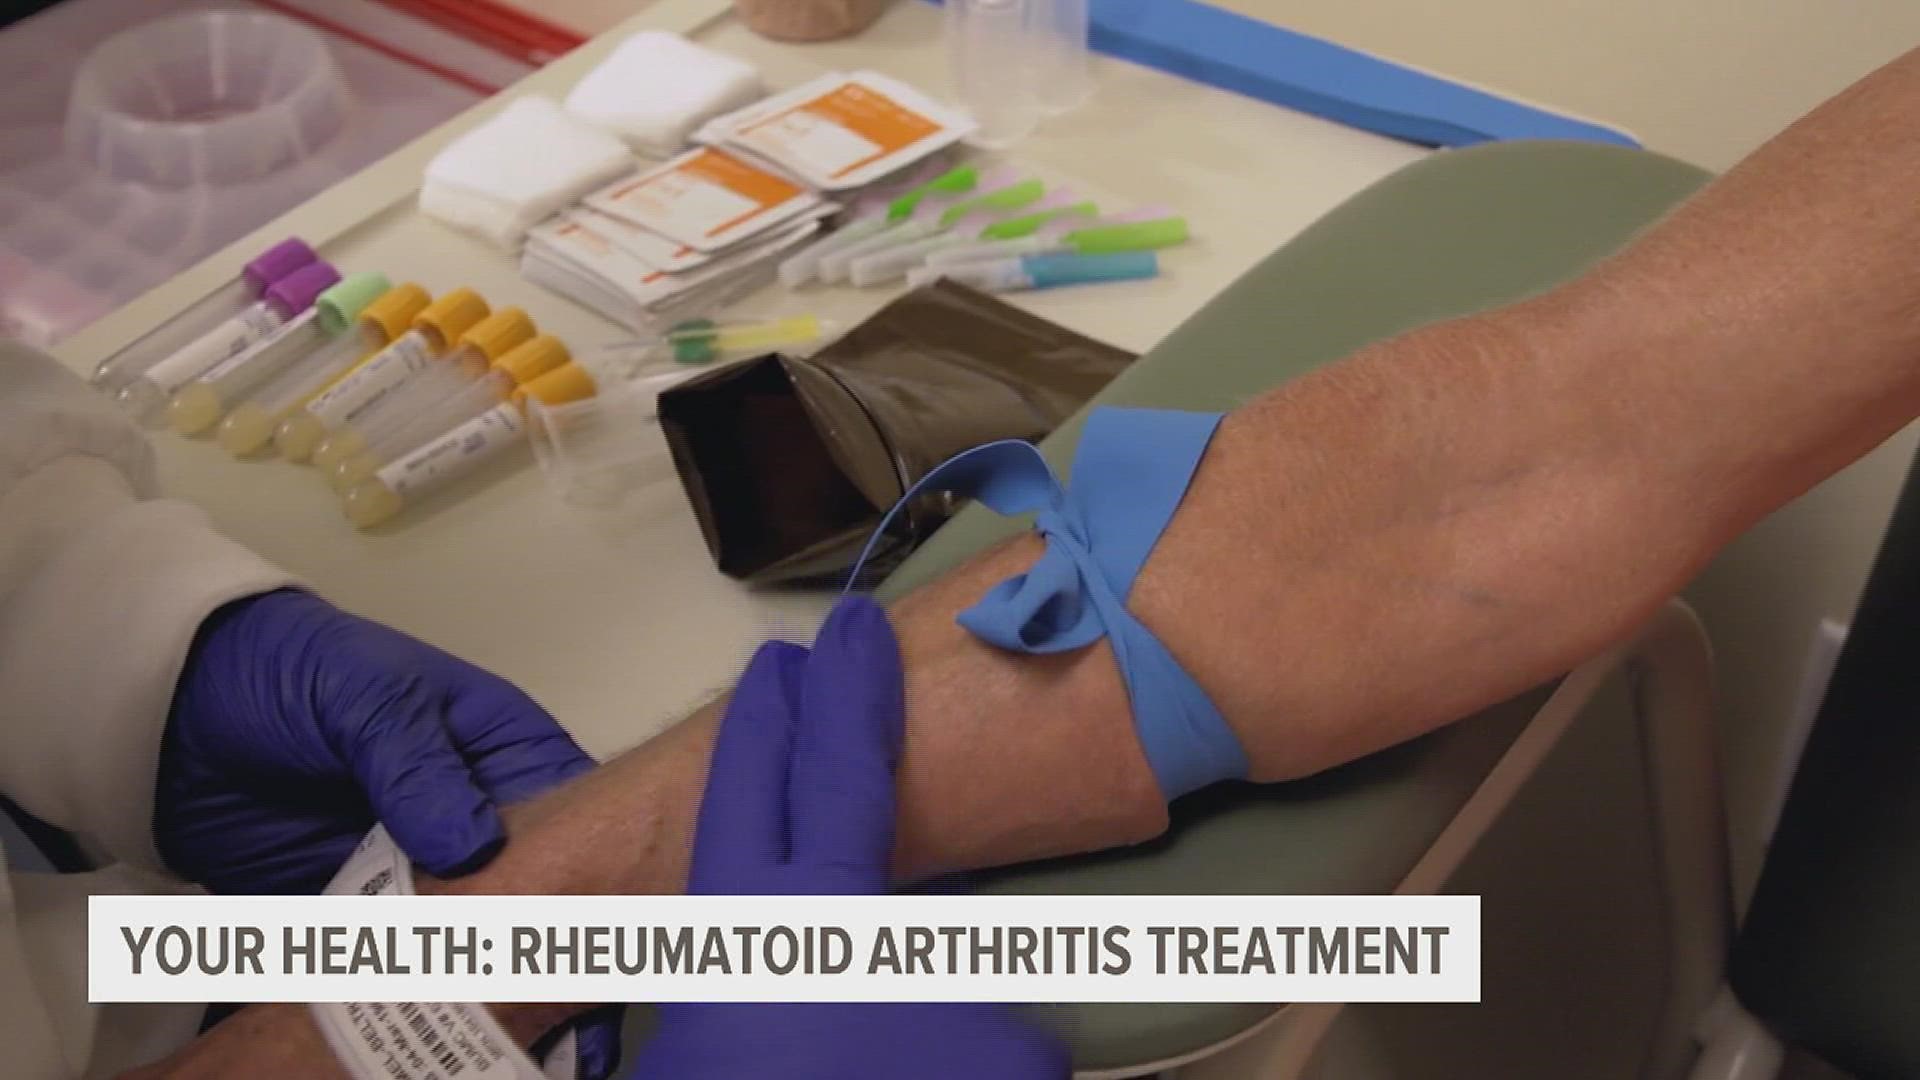 Finding the right therapy for rheumatoid arthritis is often trial and error. But now, a new blood test can take the guesswork out of prescribing medication.